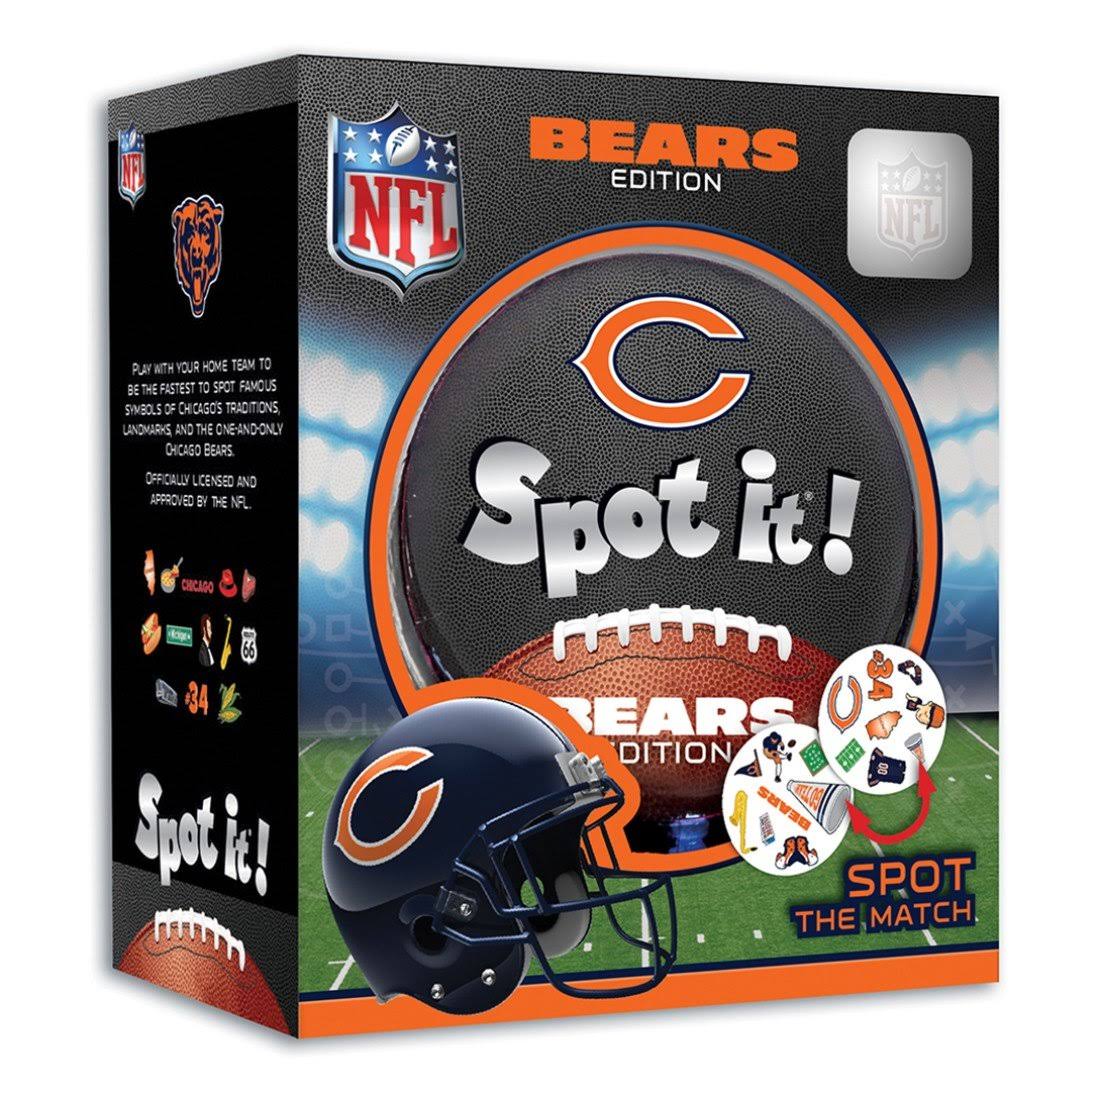 Chicago Bears Spot It! Card Game